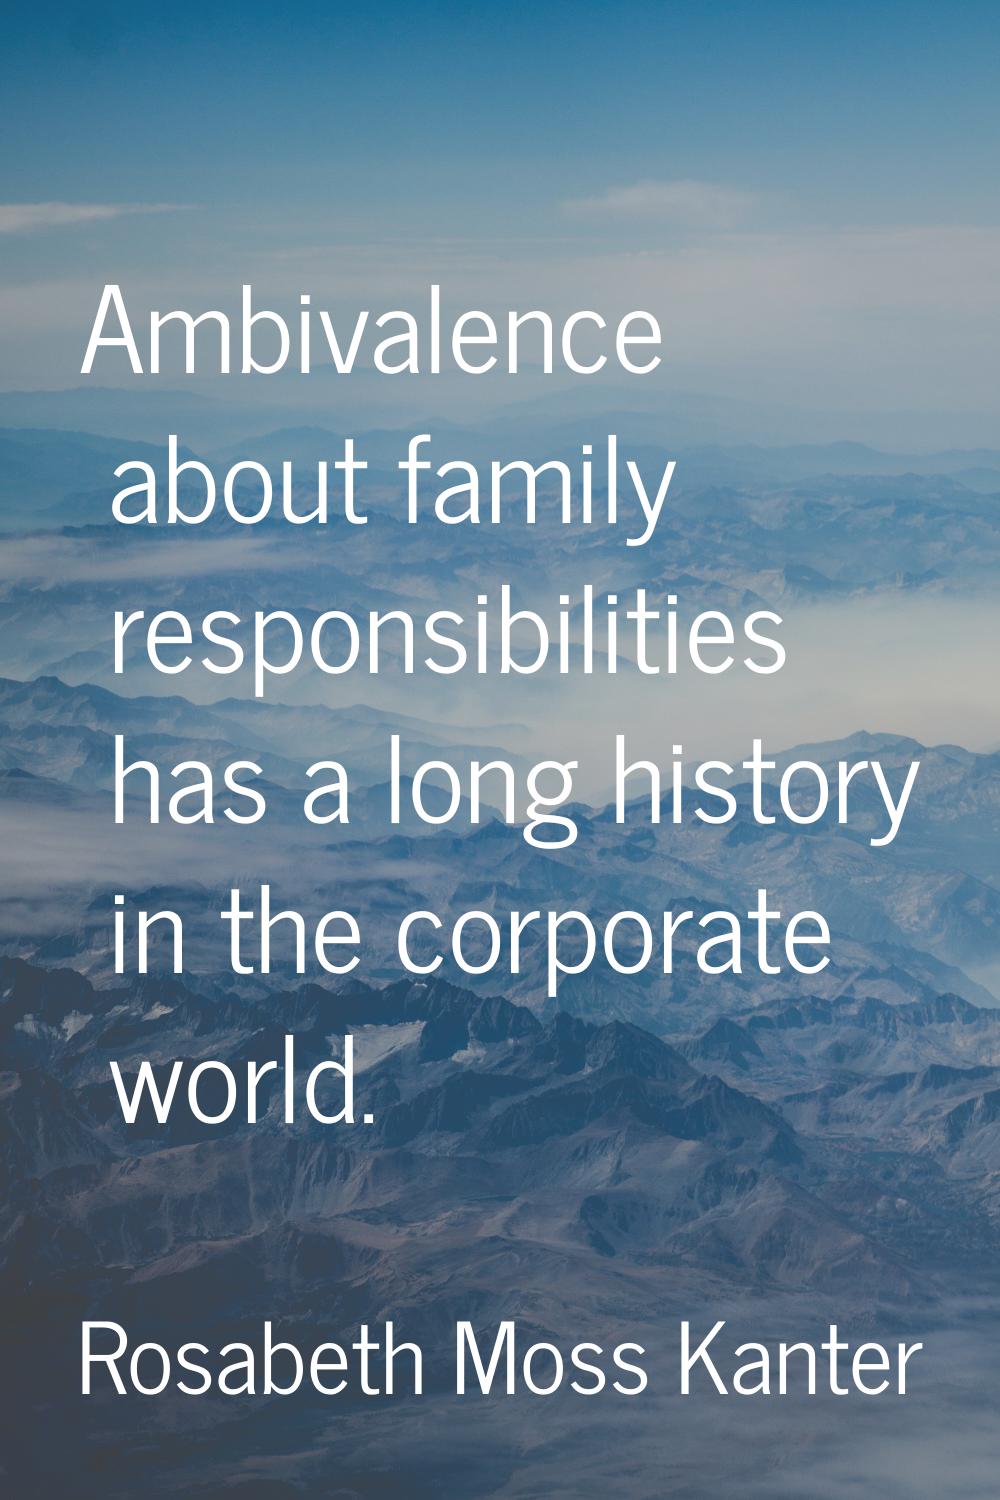 Ambivalence about family responsibilities has a long history in the corporate world.